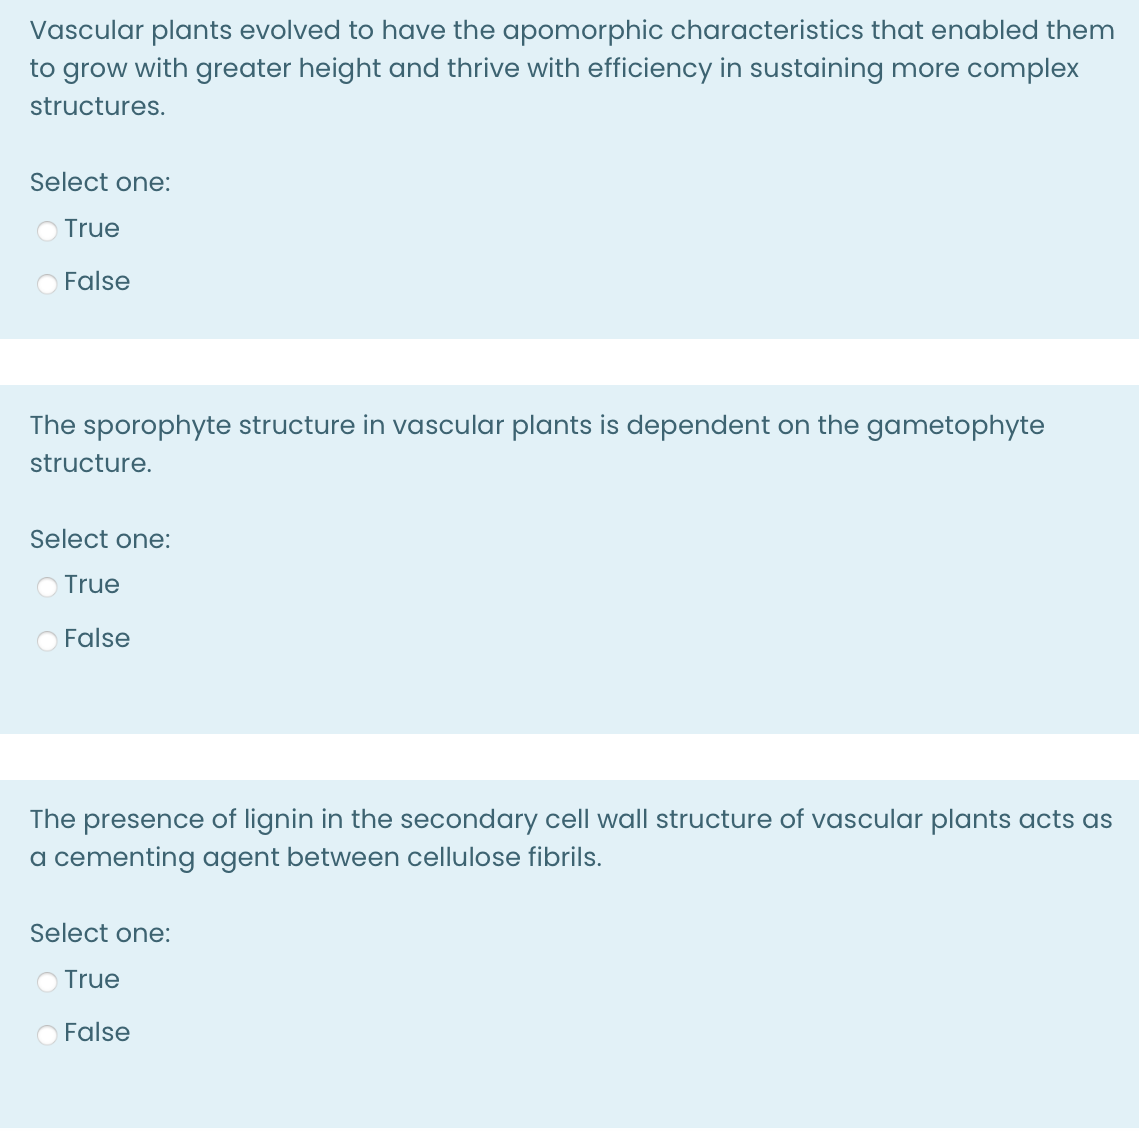 Vascular plants evolved to have the apomorphic characteristics that enabled them
to grow with greater height and thrive with efficiency in sustaining more complex
structures.
Select one:
O True
O False
The sporophyte structure in vascular plants is dependent on the gametophyte
structure.
Select one:
True
False
The presence of lignin in the secondary cell wall structure of vascular plants acts as
a cementing agent between cellulose fibrils.
Select one:
True
False